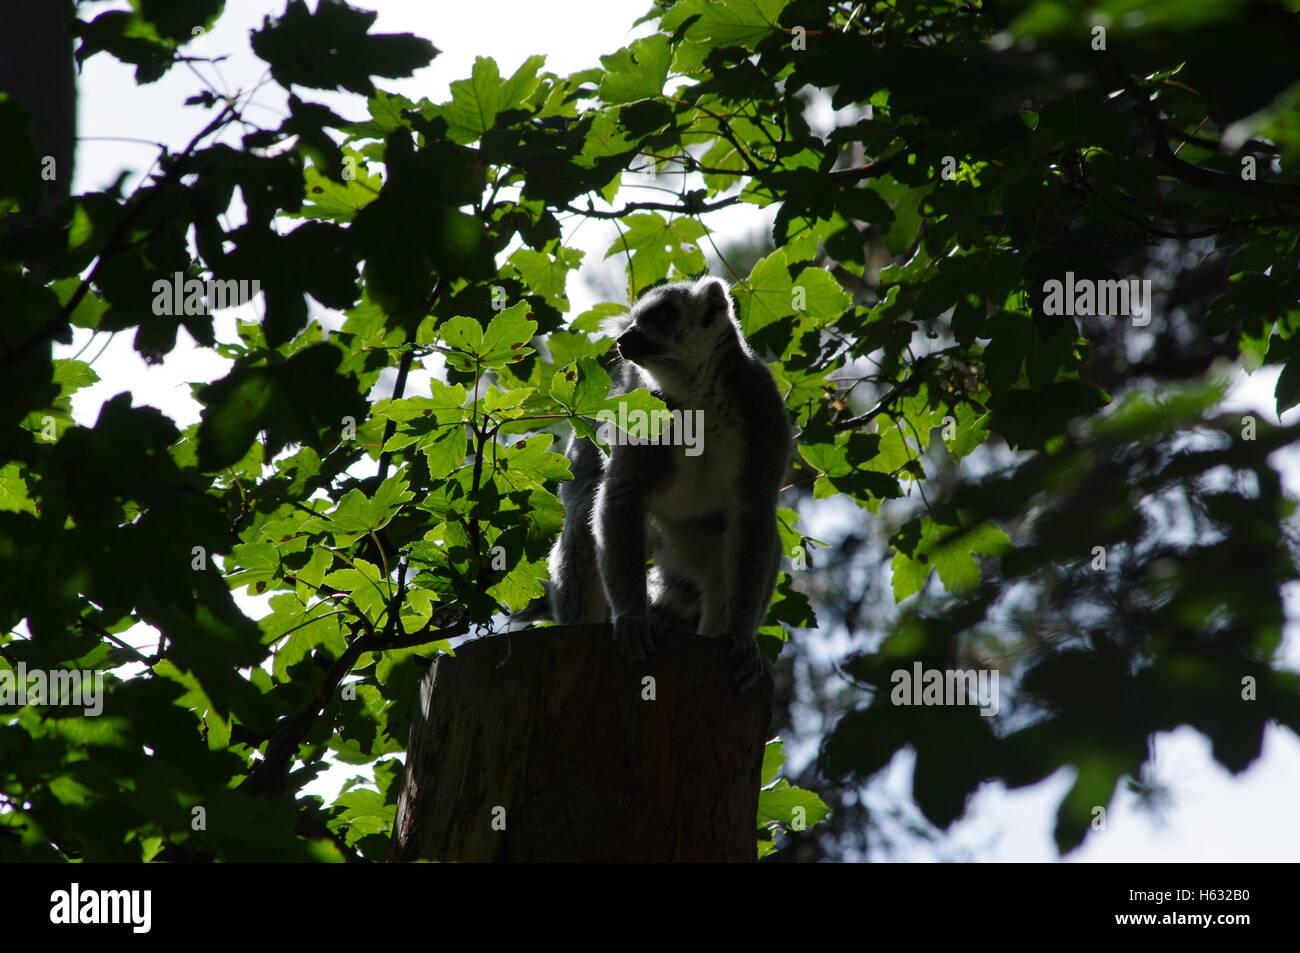 Ringtailed Lemur (Lemur catta) in the trees casting a shadowy almost silhouette figure against the bright sunshine Stock Photo